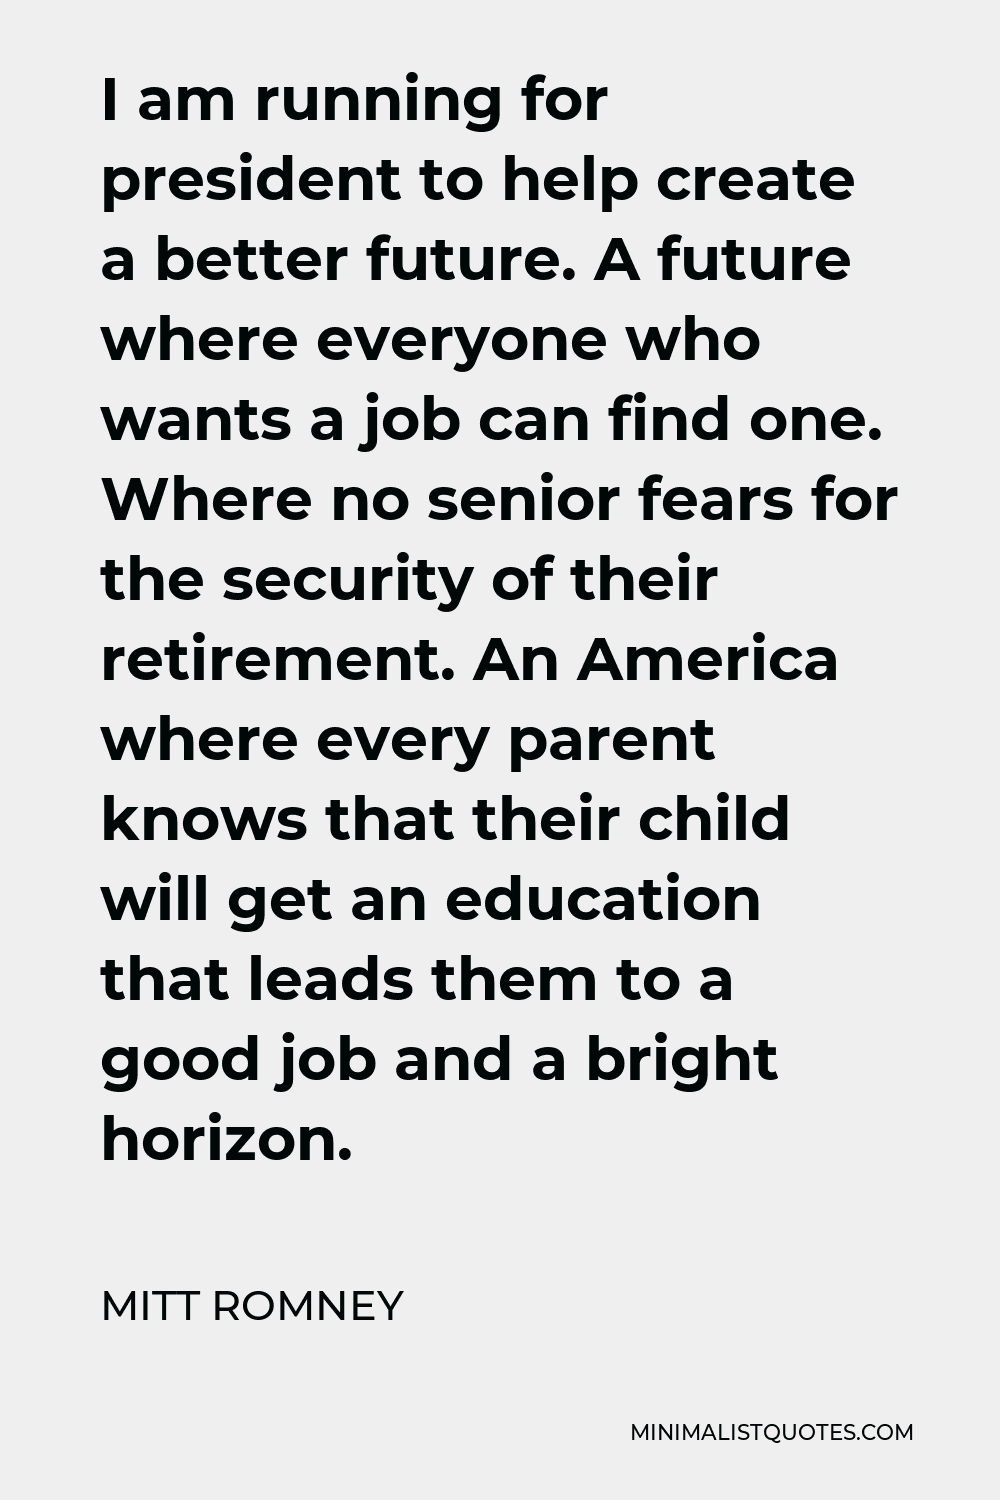 Mitt Romney Quote - I am running for president to help create a better future. A future where everyone who wants a job can find one. Where no senior fears for the security of their retirement. An America where every parent knows that their child will get an education that leads them to a good job and a bright horizon.